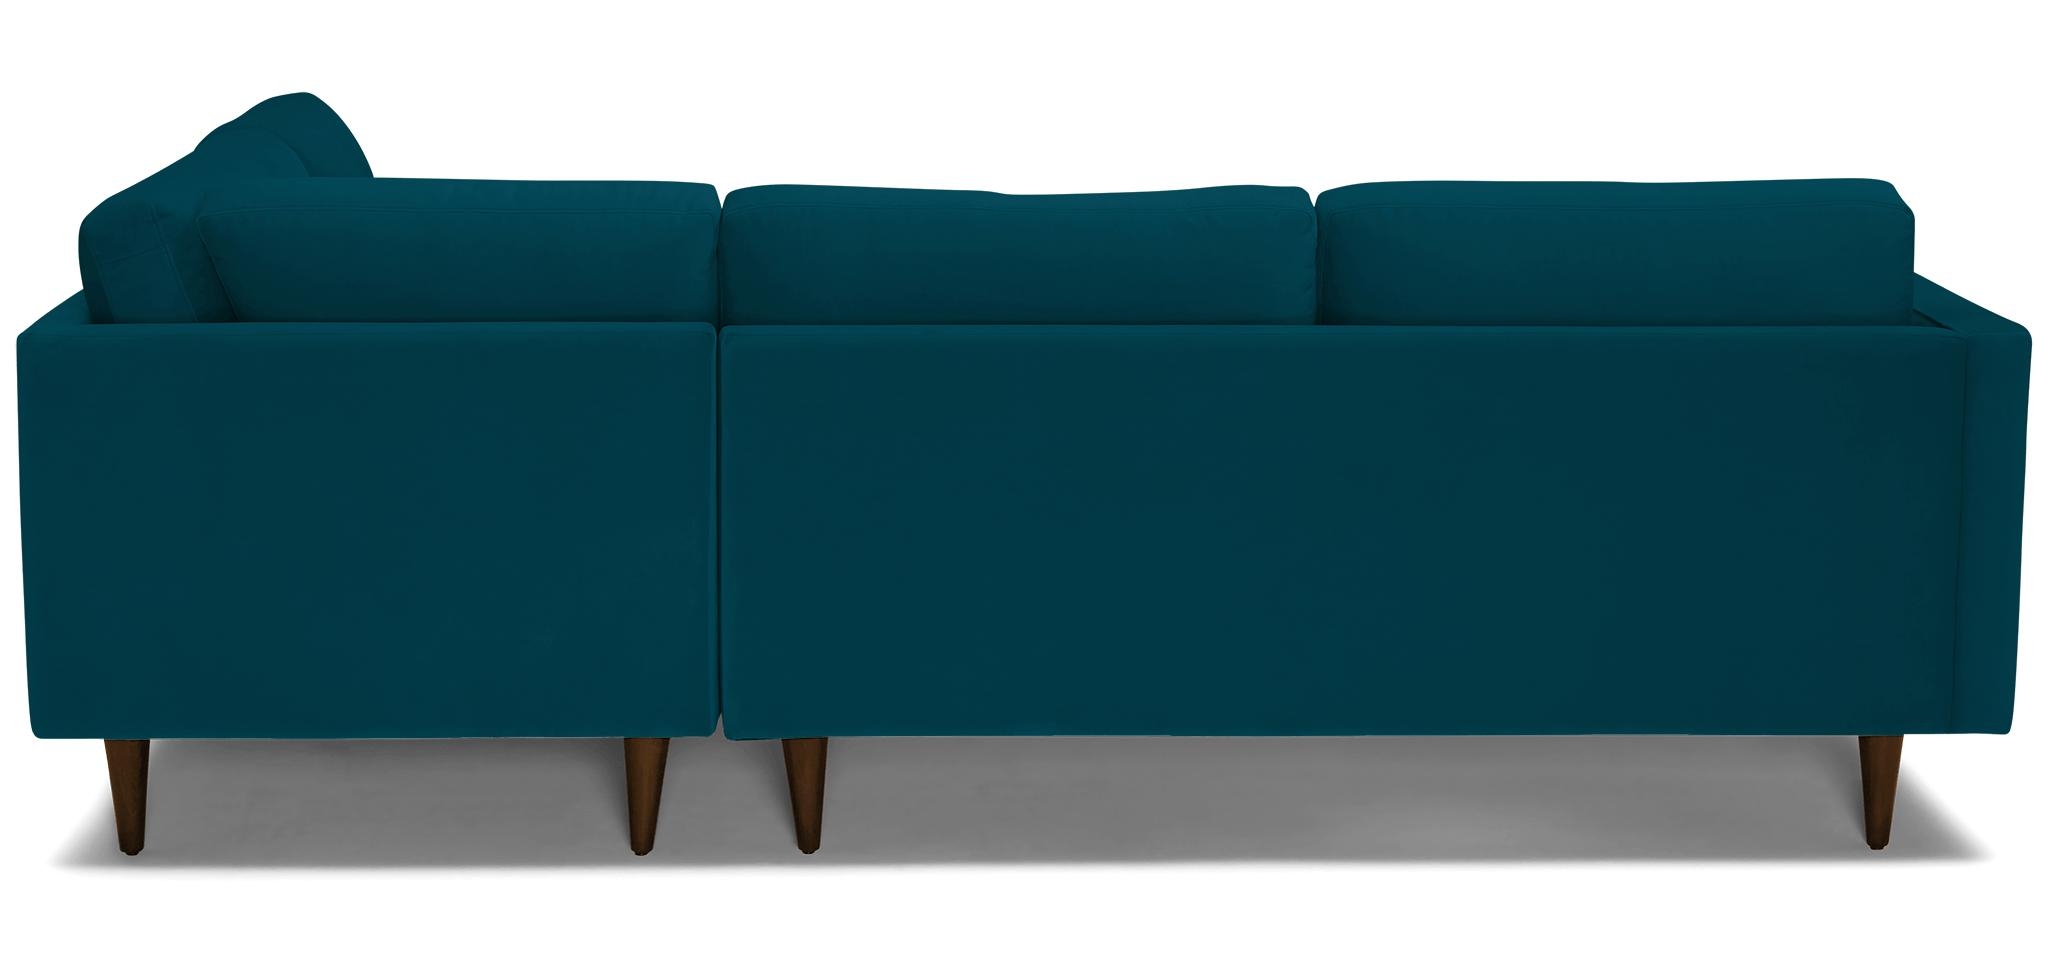 Blue Briar Mid Century Modern Sectional with Bumper - Key Largo Zenith Teal - Mocha - Right  - Image 4